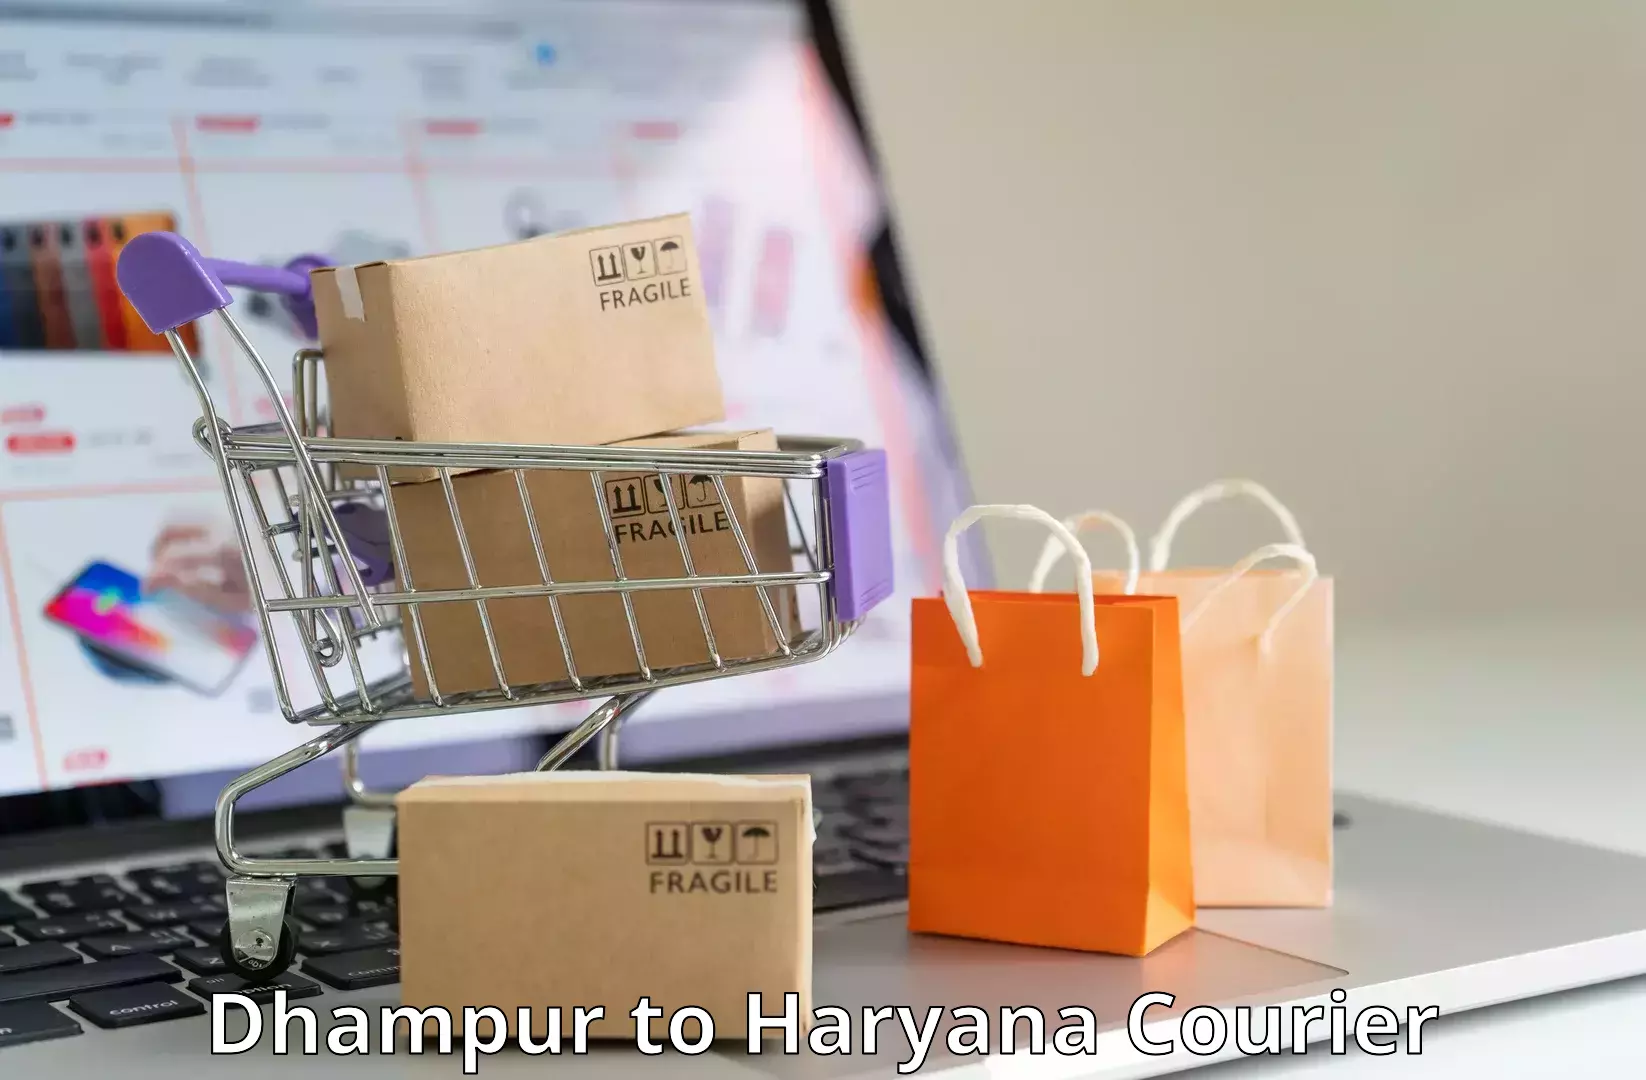 Speedy delivery service Dhampur to Haryana